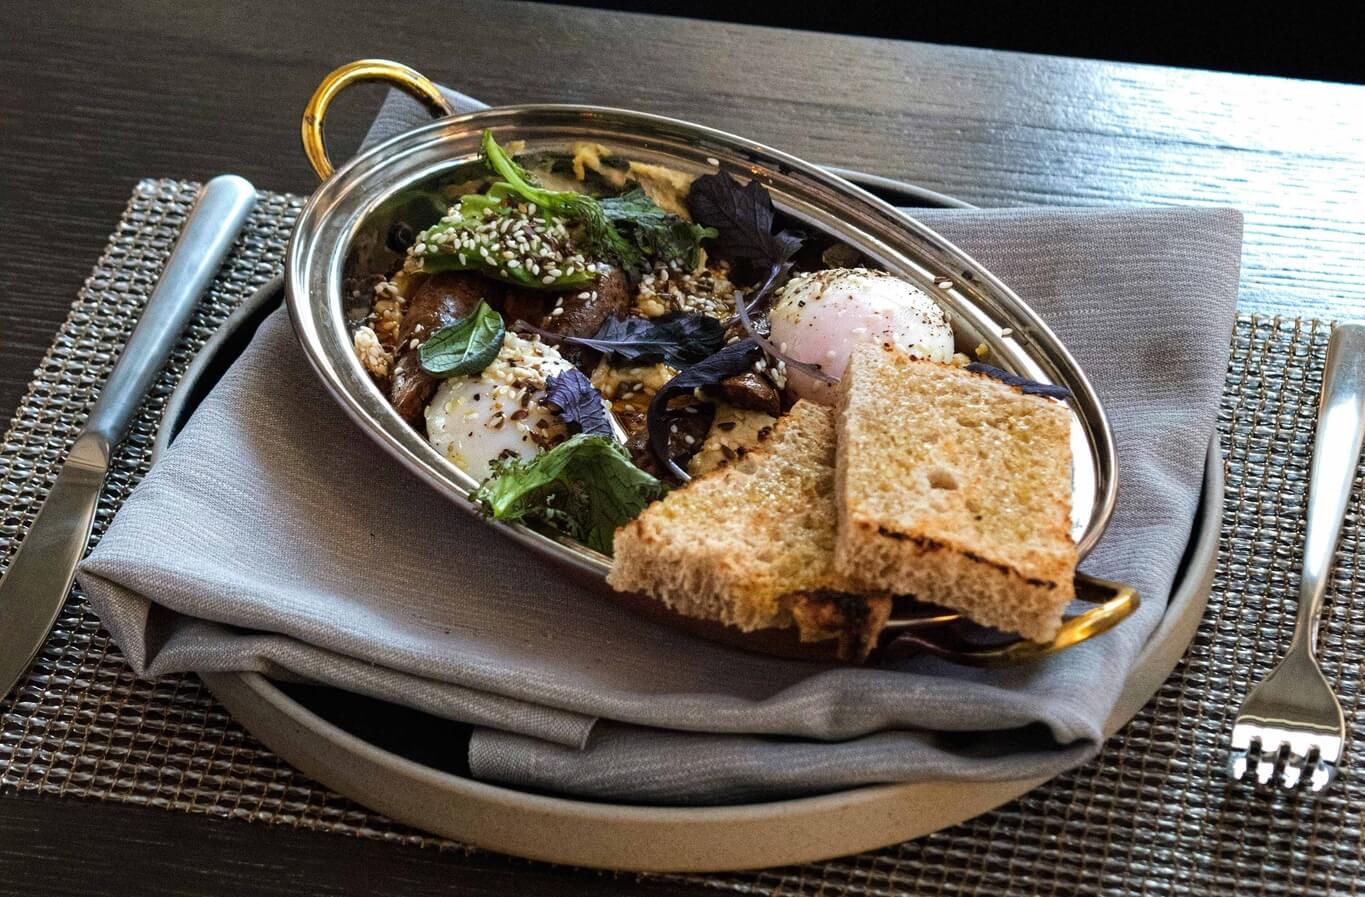 A silver serving tray with toast, sausages and eggs and greens